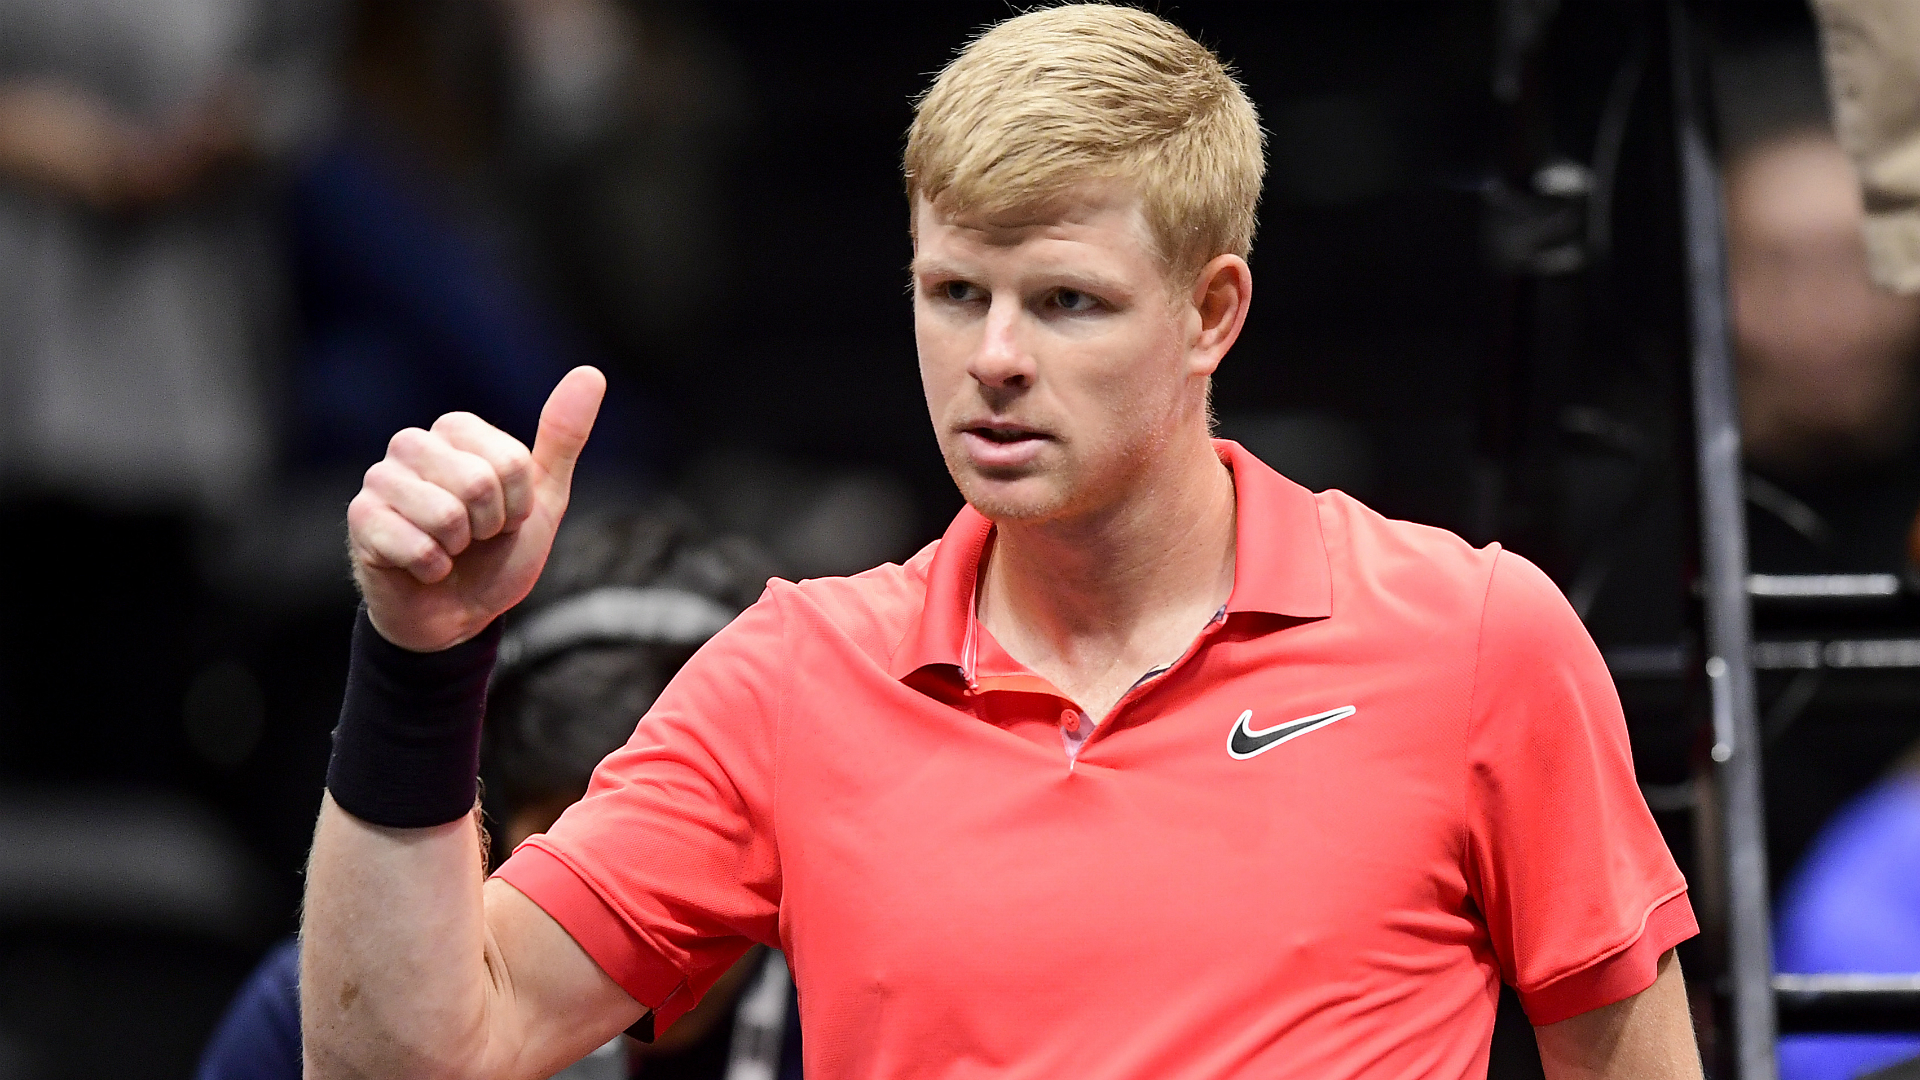 Kyle Edmund prevailed over Italian opponent Andreas Seppi after one hour, 21 minutes for his second ATP crown.